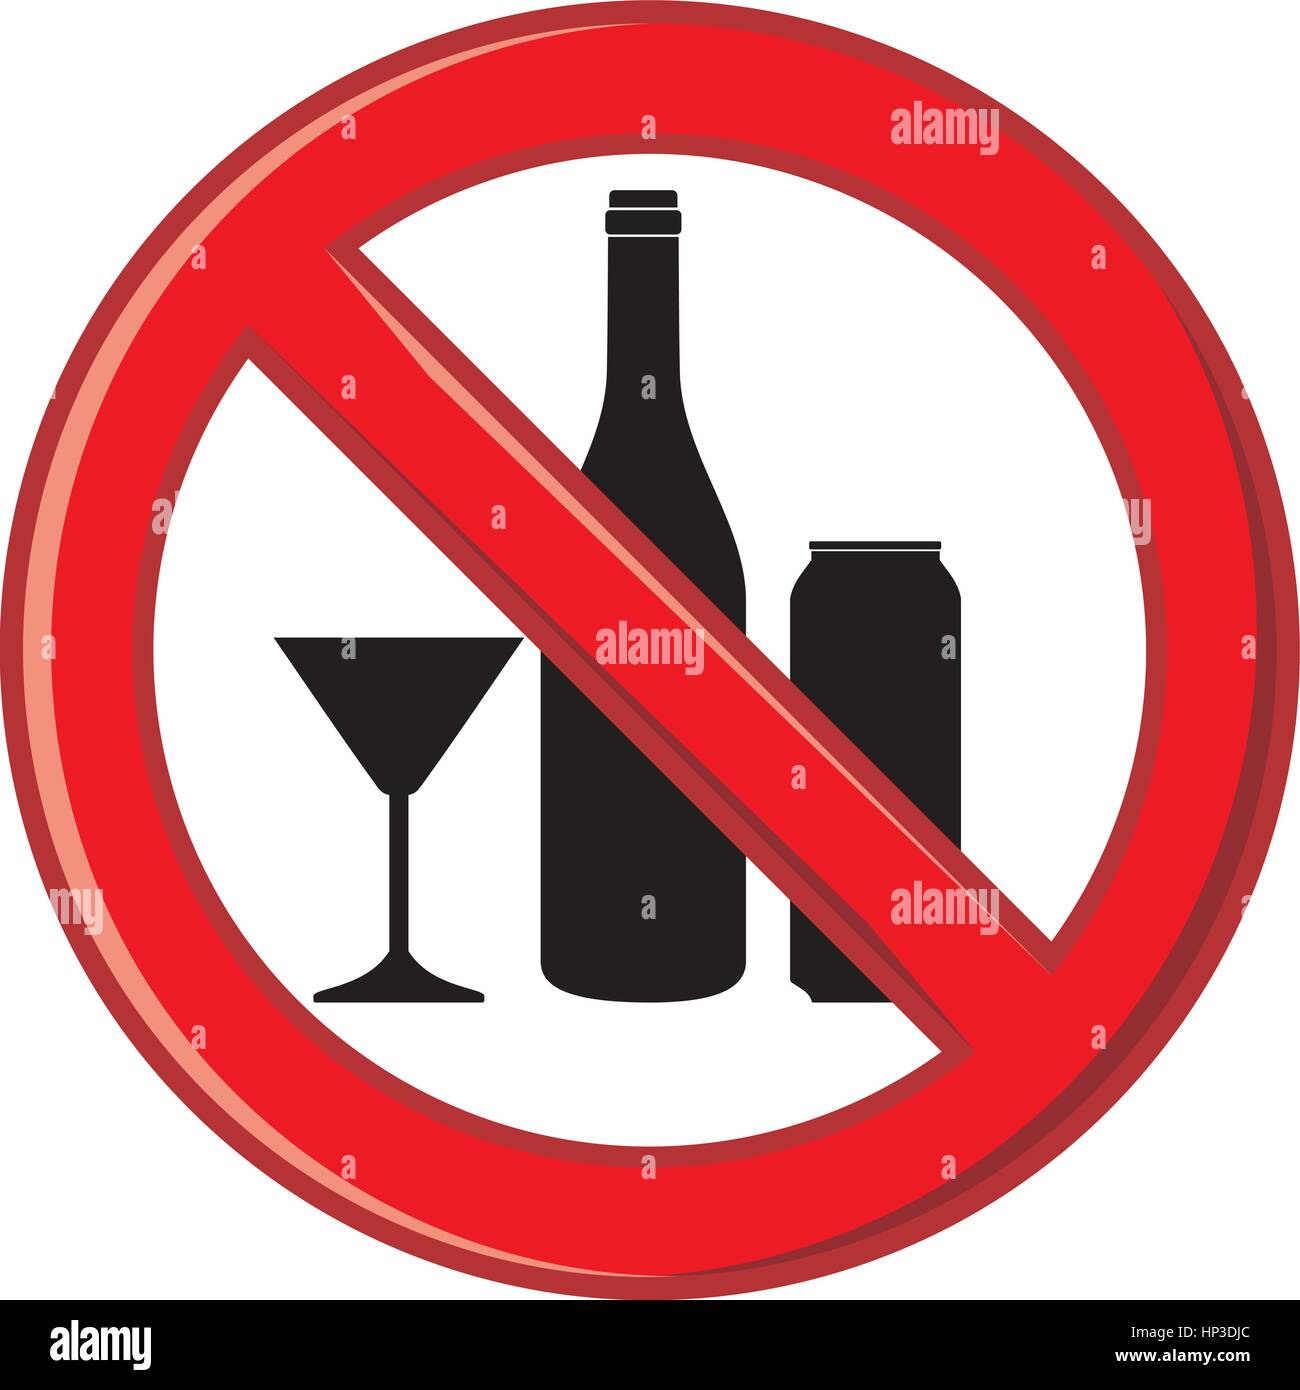 Banning Alcohol From Mainstream Consumption